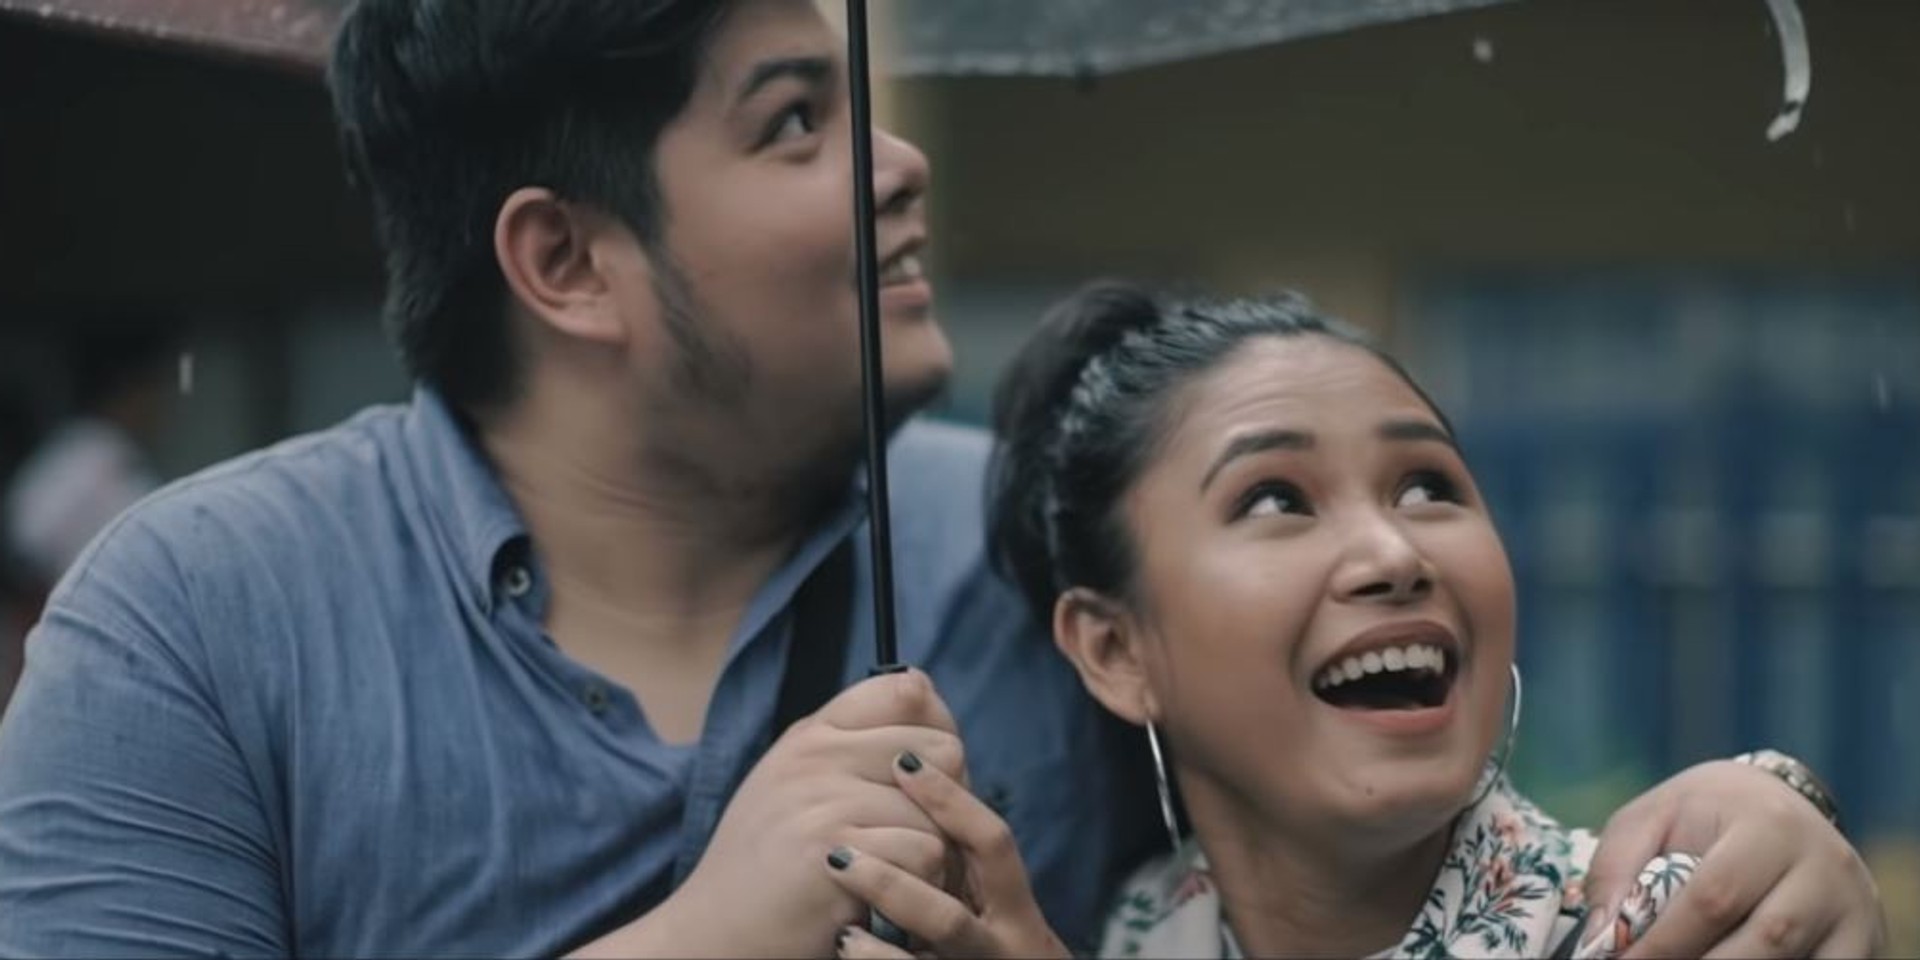 December Avenue & Moira Dela Torre unveil heartbreaking 'Kung 'Di Rin Lang Ikaw' music video – watch